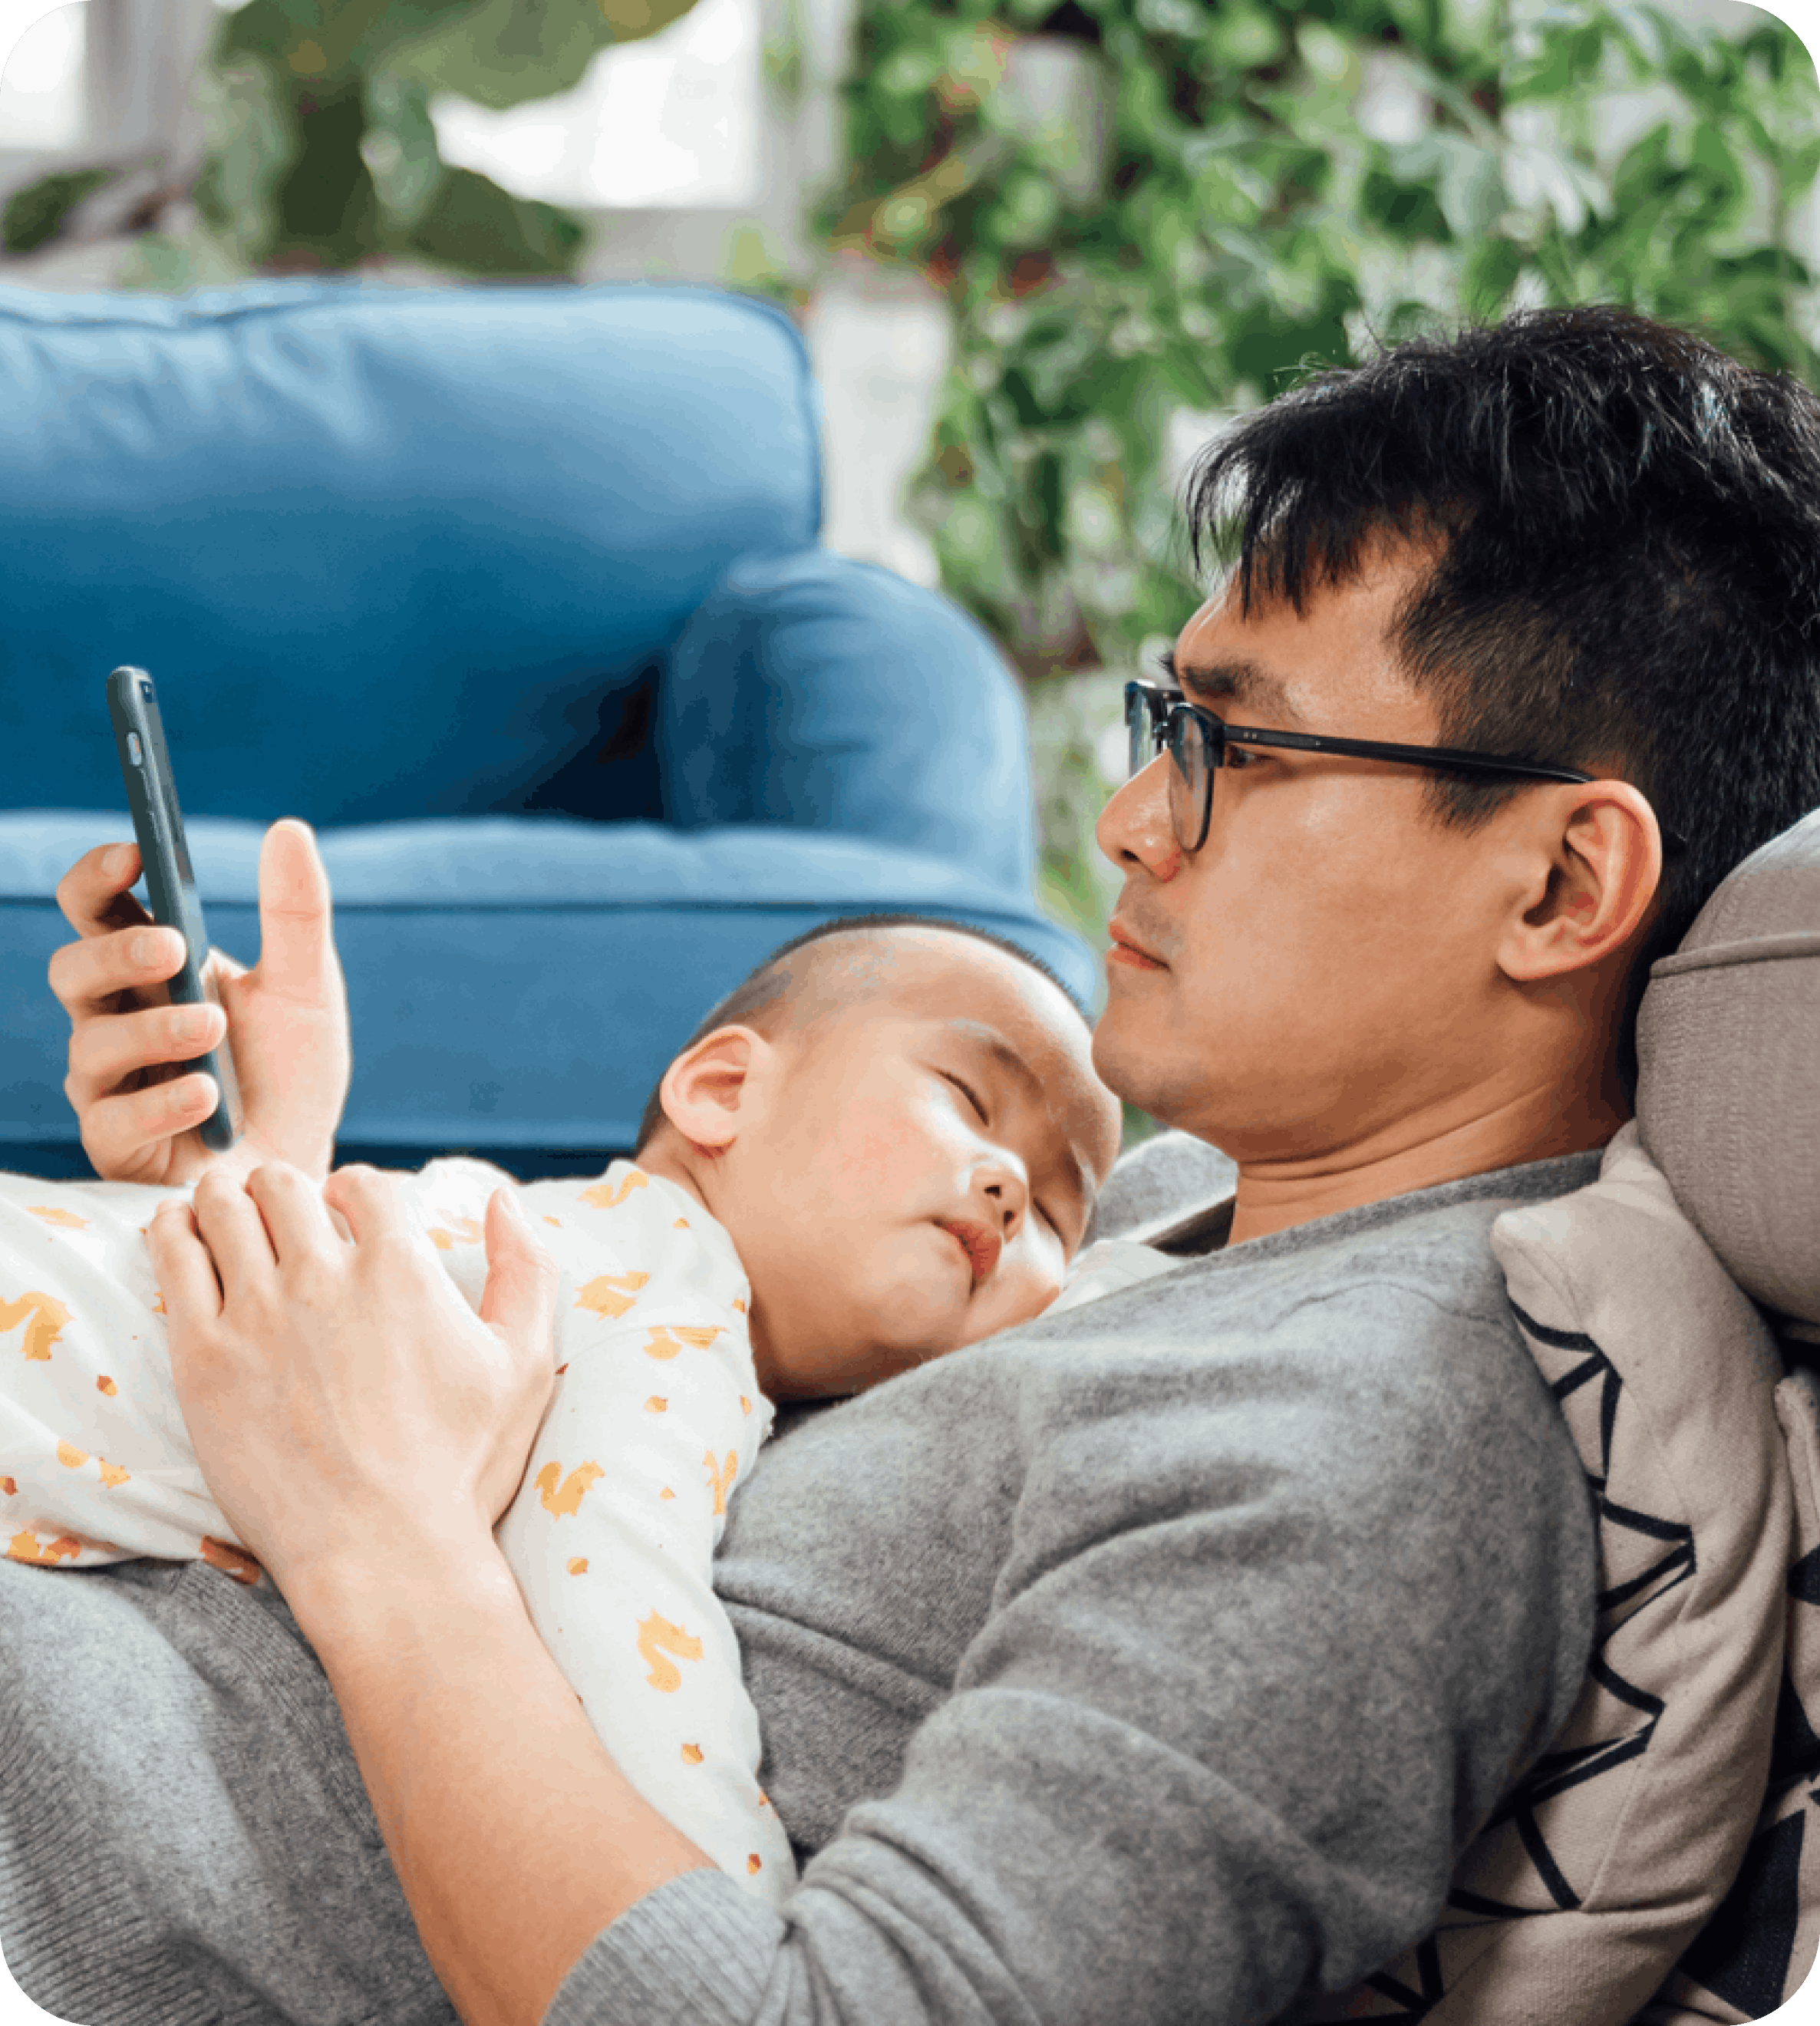 Image of a father holding his sleeping baby while looking at his smartphone at home.